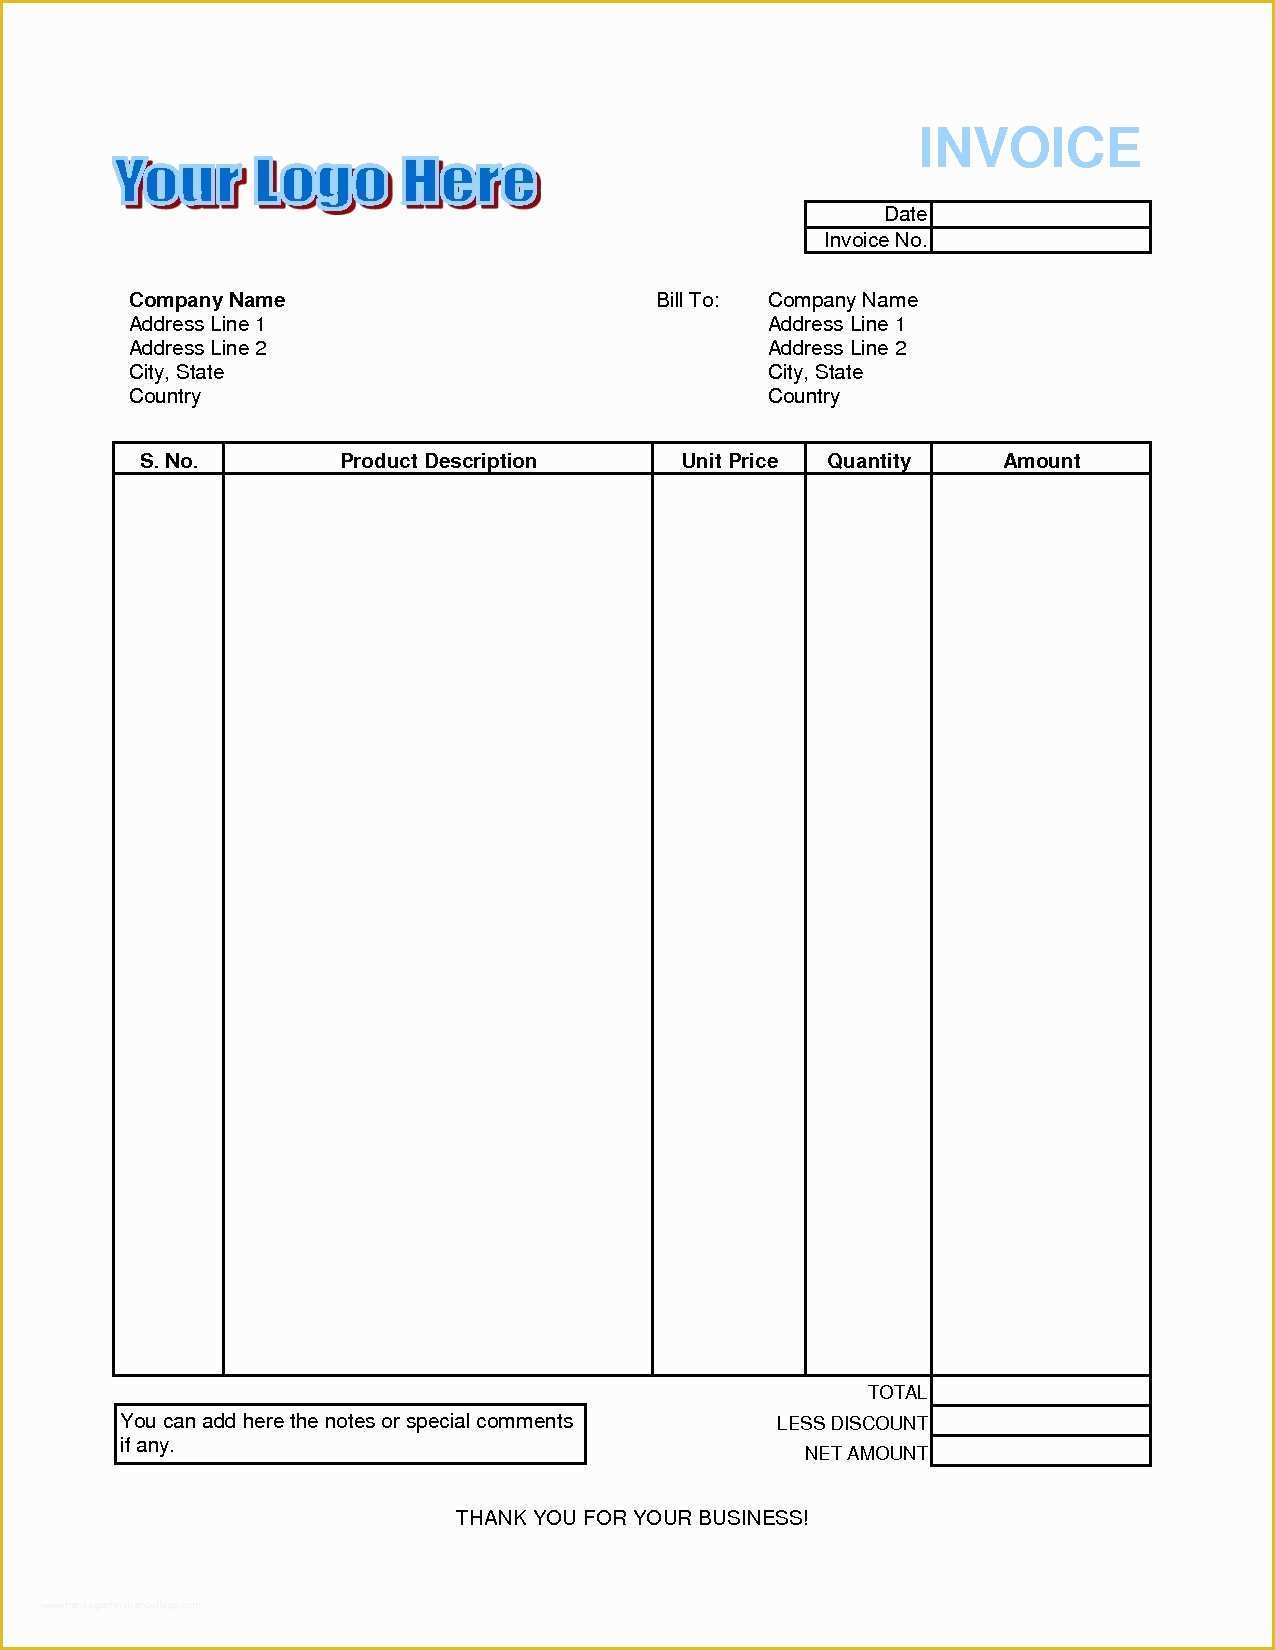 Free Printable Invoice Templates Excel Of Invoice format In Excel Sheet Free Download